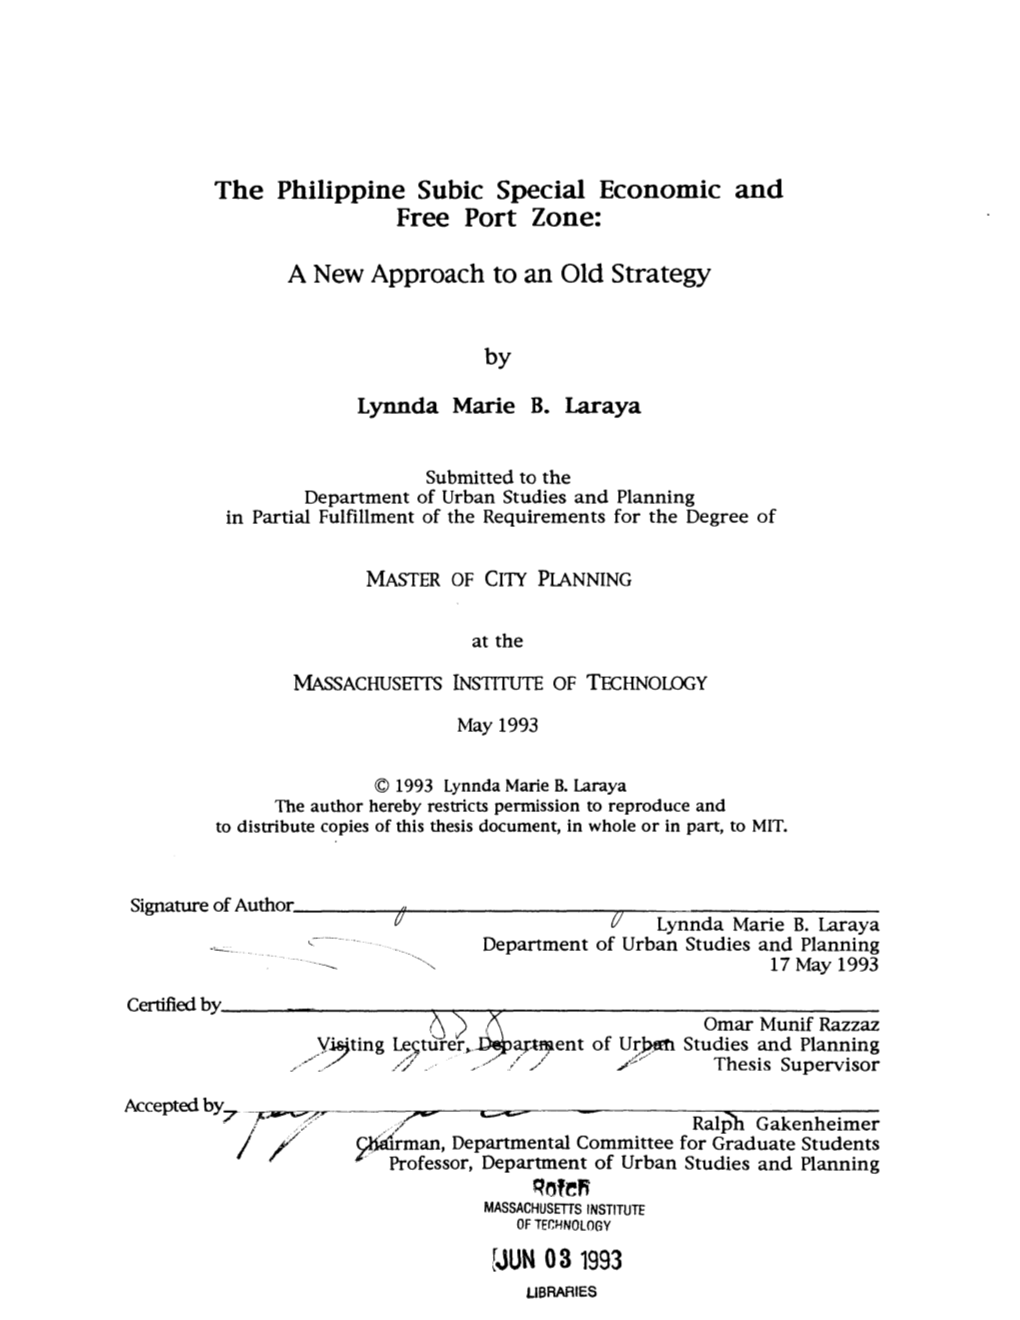 The Philippine Subic Special Economic and Free Port Zone: a New Approach to an Old Strategy